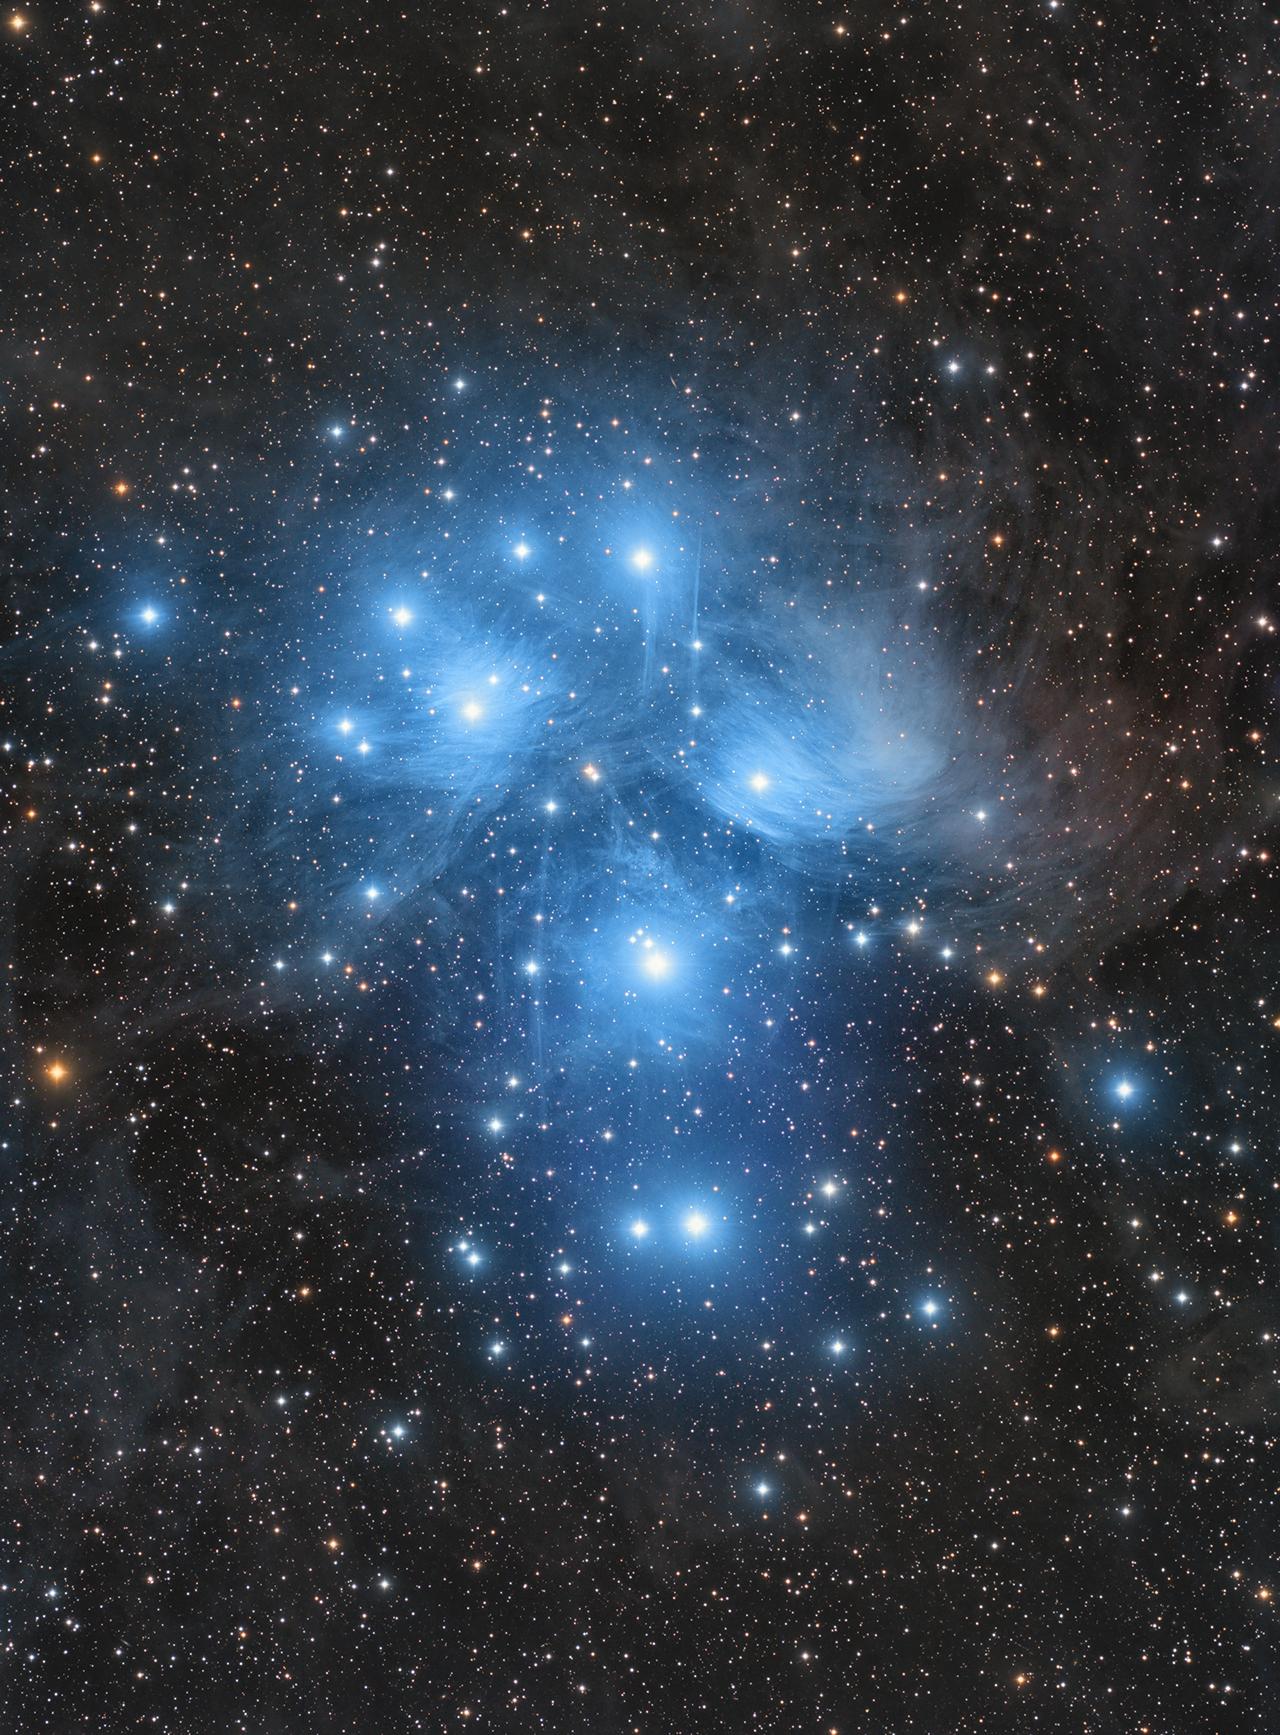 An image showing 'The Pleiades – Two Panel Mosaic'